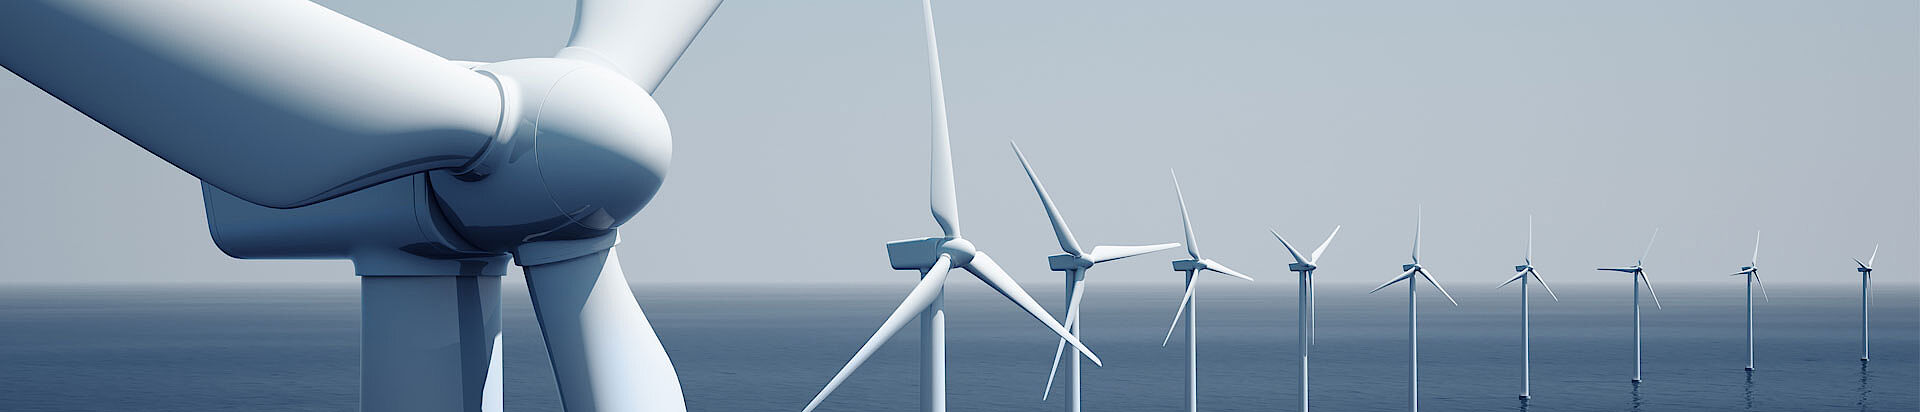 YOUR RELIABLE PARTNER FOR WIND FARM OPTIMISATION